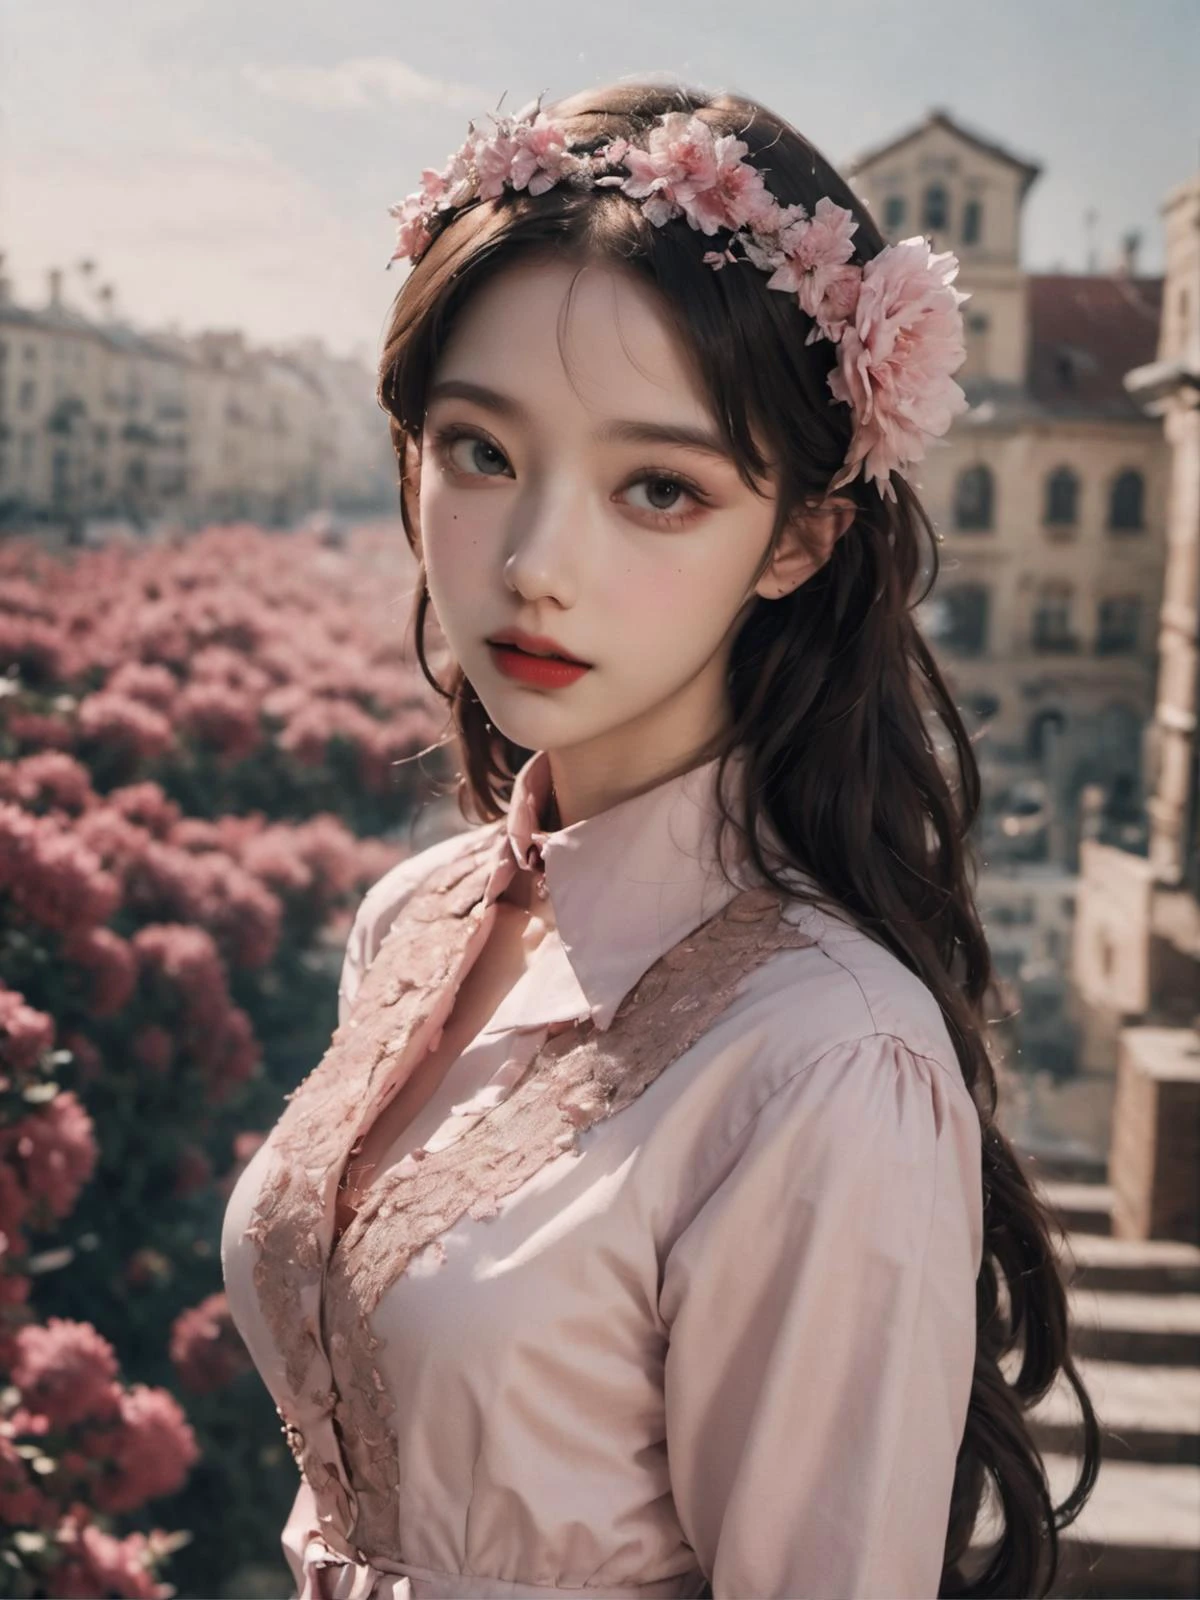 (photo realistic), extremely detailed and delicate illustration, beautiful and aesthetic, official art, one girl, ((pink theme, white theme, crowned princess fairytale theme)), dream-like, (beautiful princess is dancing in palace, focus on her), (Pirouette), rim lighting, dark background, lowkey, dark shot, depth, dof, detailed shadow, dramatic lighting, (fullbody, dynamic composition), 8k, UHD, HDR, (Masterpiece:1. 5), (best quality:1. 5), RAW candid cinema, studio, 16mm, ((color graded portra 400 film)) ((remarkable color)), (ultra realistic), textured skin, remarkable detailed pupils, ((realistic dull skin noise)), ((visible skin detail)), ((skin fuzz)), (dry skin) shot with cinematic camera, 8k, UHD, HDR, (Masterpiece:1. 5), (best quality:1. 5), RAW candid cinema, studio, 16mm, ((color graded portra 400 film)) ((remarkable color)), (ultra realistic), textured skin, remarkable detailed pupils, ((realistic dull skin noise)), ((visible skin detail)), ((skin fuzz)), (dry skin) shot with cinematic camera, 8k, UHD, HDR, (Masterpiece:1. 5), (best quality:1. 5), RAW candid cinema, studio, 16mm, ((color graded portra 400 film)) ((remarkable color)), (ultra realistic), textured skin, remarkable detailed pupils, ((realistic dull skin noise)), ((visible skin detail)), ((skin fuzz)), (dry skin) shot with cinematic camera, 8k, UHD, HDR, (Masterpiece:1. 5), (best quality:1. 5), RAW candid cinema, studio, 16mm, ((color graded portra 400 film)) ((remarkable color)), (ultra realistic), textured skin, remarkable detailed pupils, ((realistic dull skin noise)), ((visible skin detail)), ((skin fuzz)), (dry skin) shot with cinematic camera, 8k, UHD, HDR, (Masterpiece:1. 5), (best quality:1. 5), RAW candid cinema, studio, 16mm, ((color graded portra 400 film)) ((remarkable color)), (ultra realistic), textured skin, remarkable detailed pupils, ((realistic dull skin noise)), ((visible skin detail)), ((skin fuzz)), (dry skin) shot with cinematic camera, 8k, UHD, HDR, (Masterpiece:1. 5), (best quality:1. 5), RAW candid cinema, studio, 16mm, ((color graded portra 400 film)) ((remarkable color)), (ultra realistic), textured skin, remarkable detailed pupils, ((realistic dull skin noise)), ((visible skin detail)), ((skin fuzz)), (dry skin) shot with cinematic camera